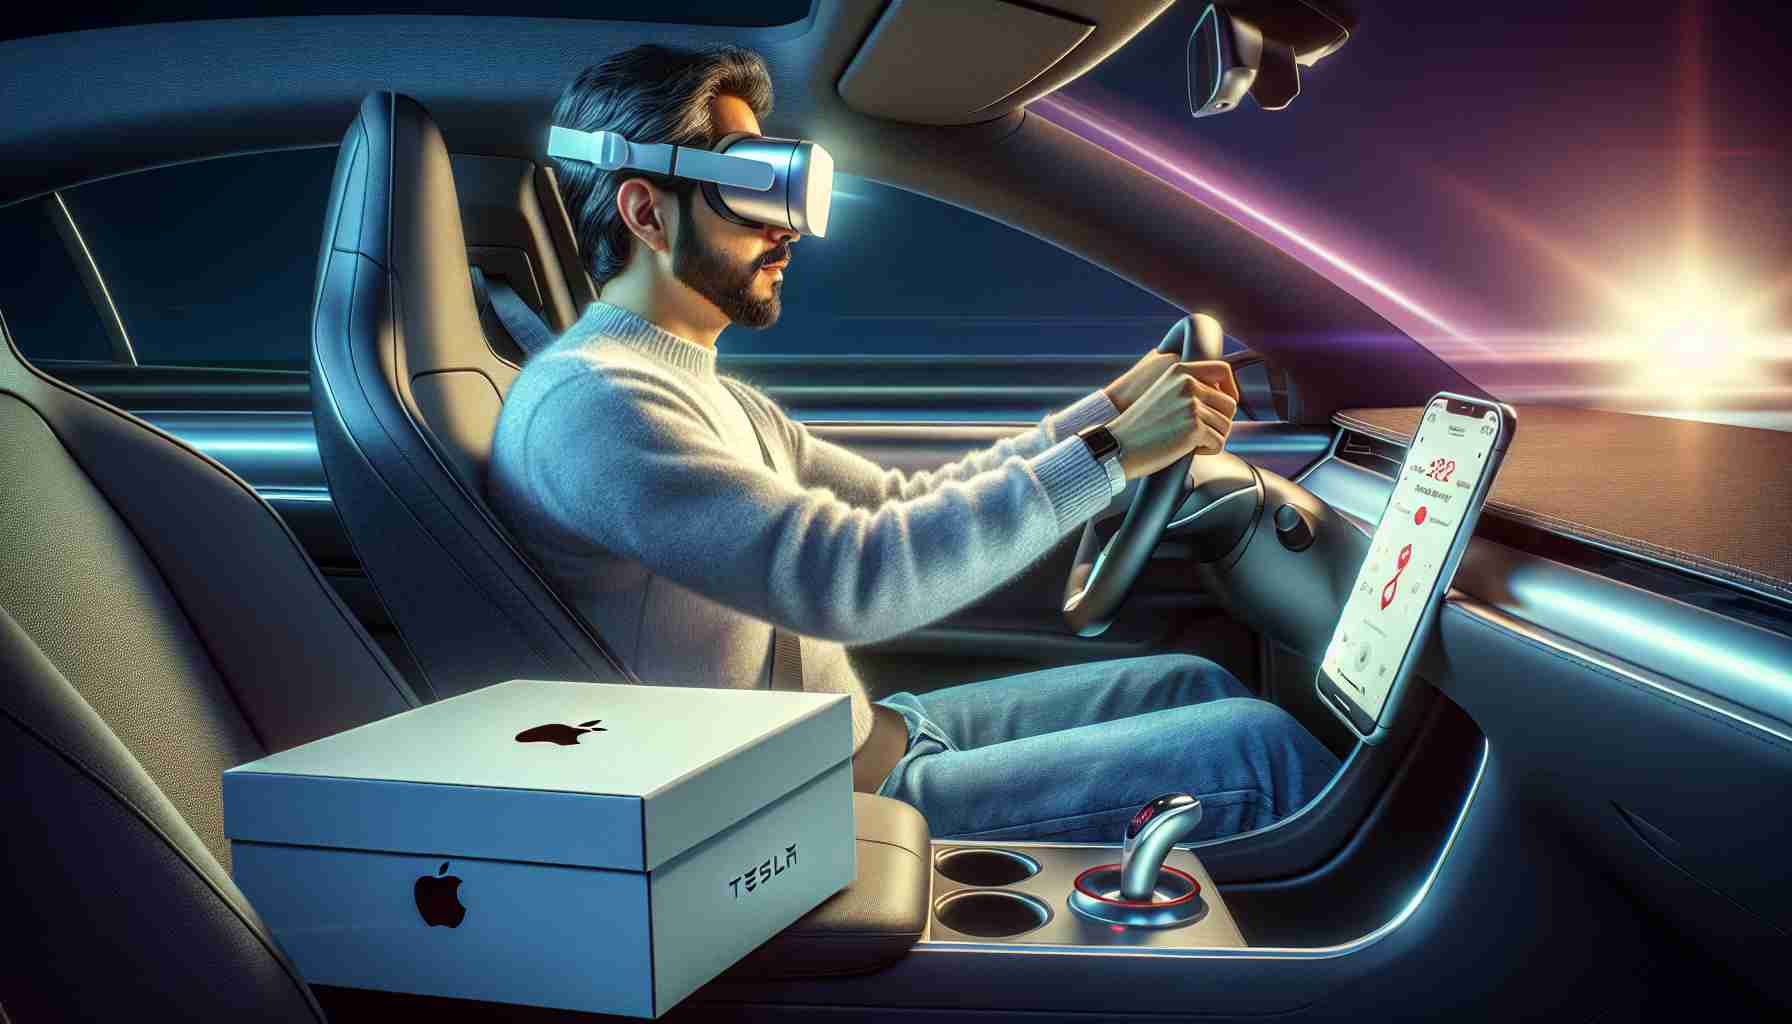 Tesla Owners Advised Not to Wear Apple VR Headsets While Driving